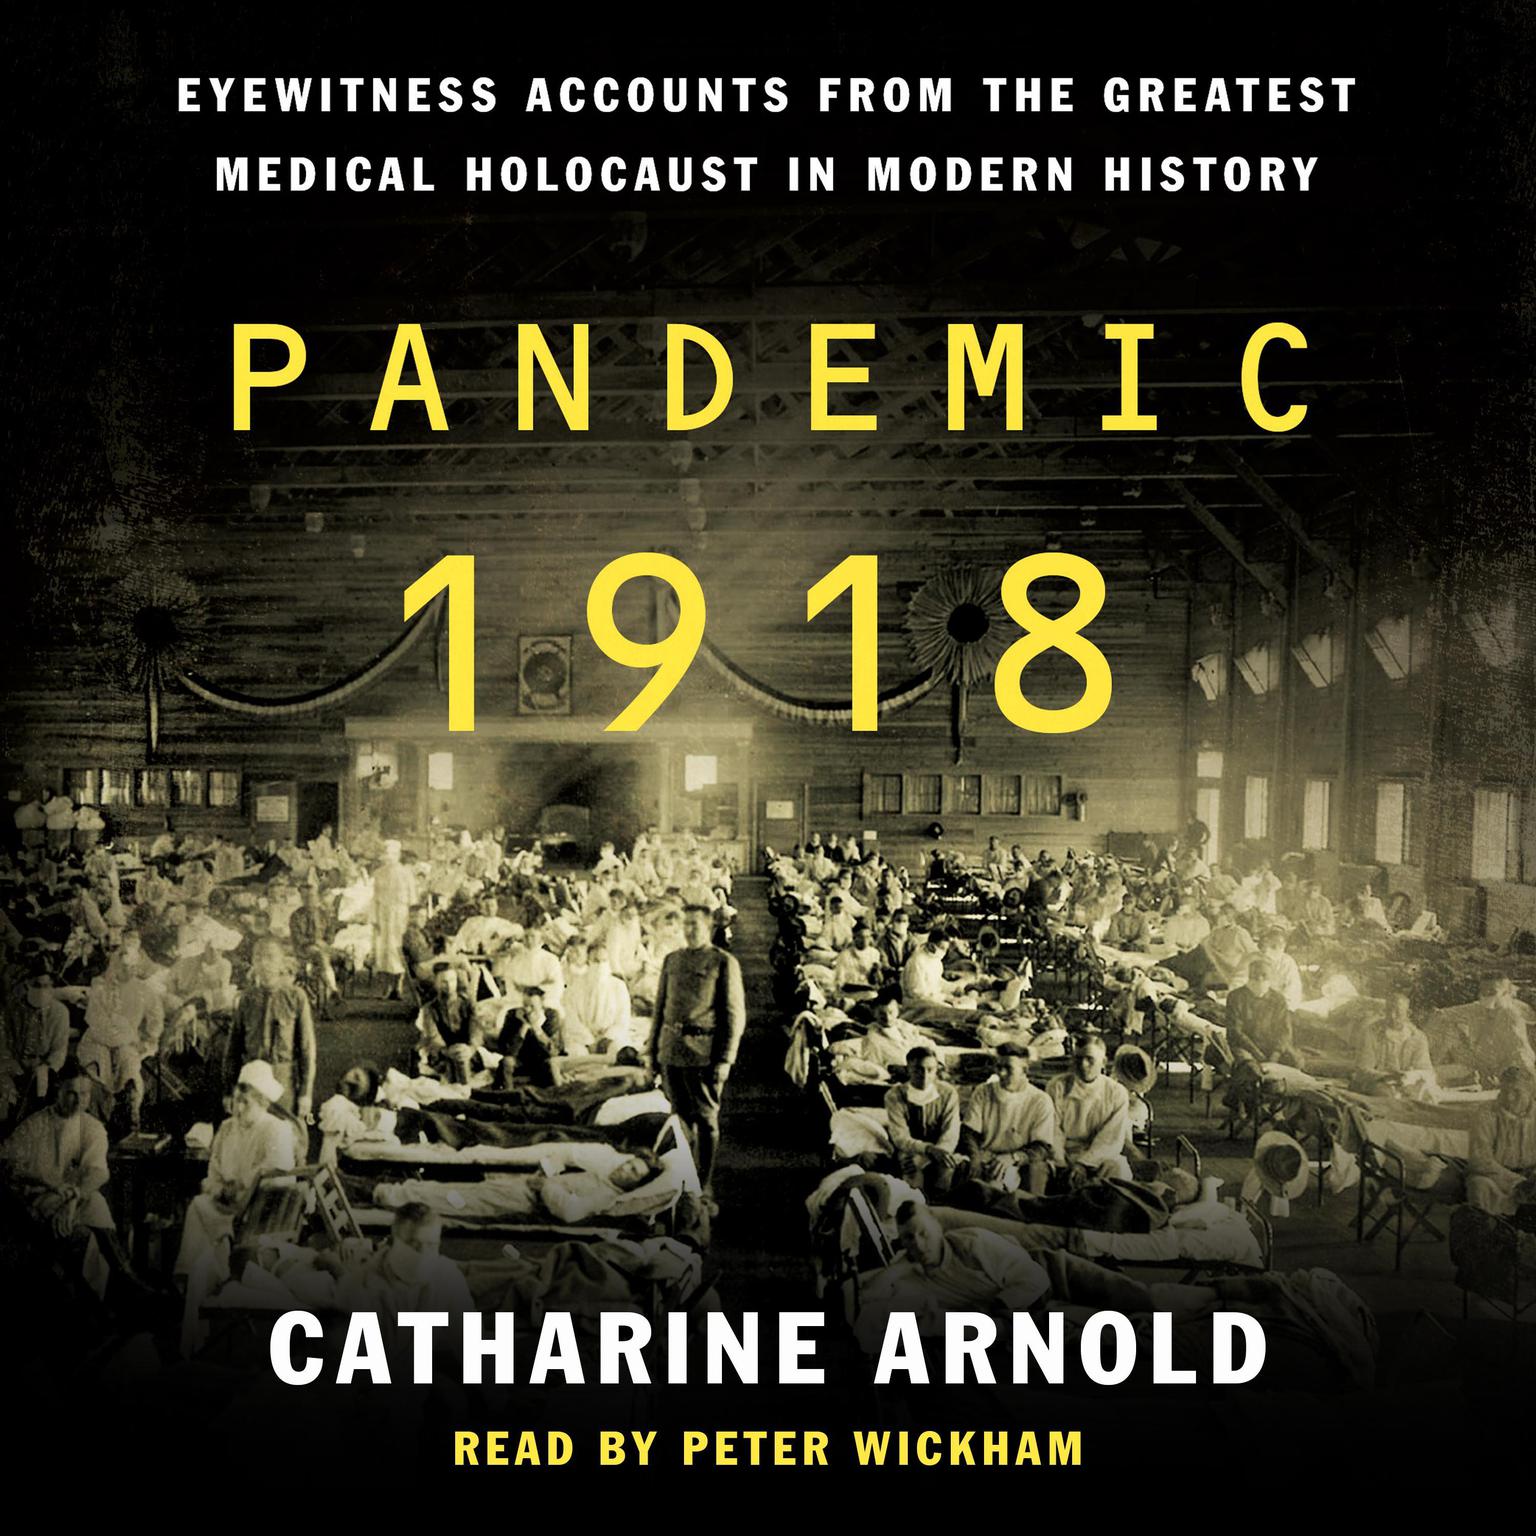 Pandemic 1918: Eyewitness Accounts from the Greatest Medical Holocaust in Modern History Audiobook, by Catharine Arnold